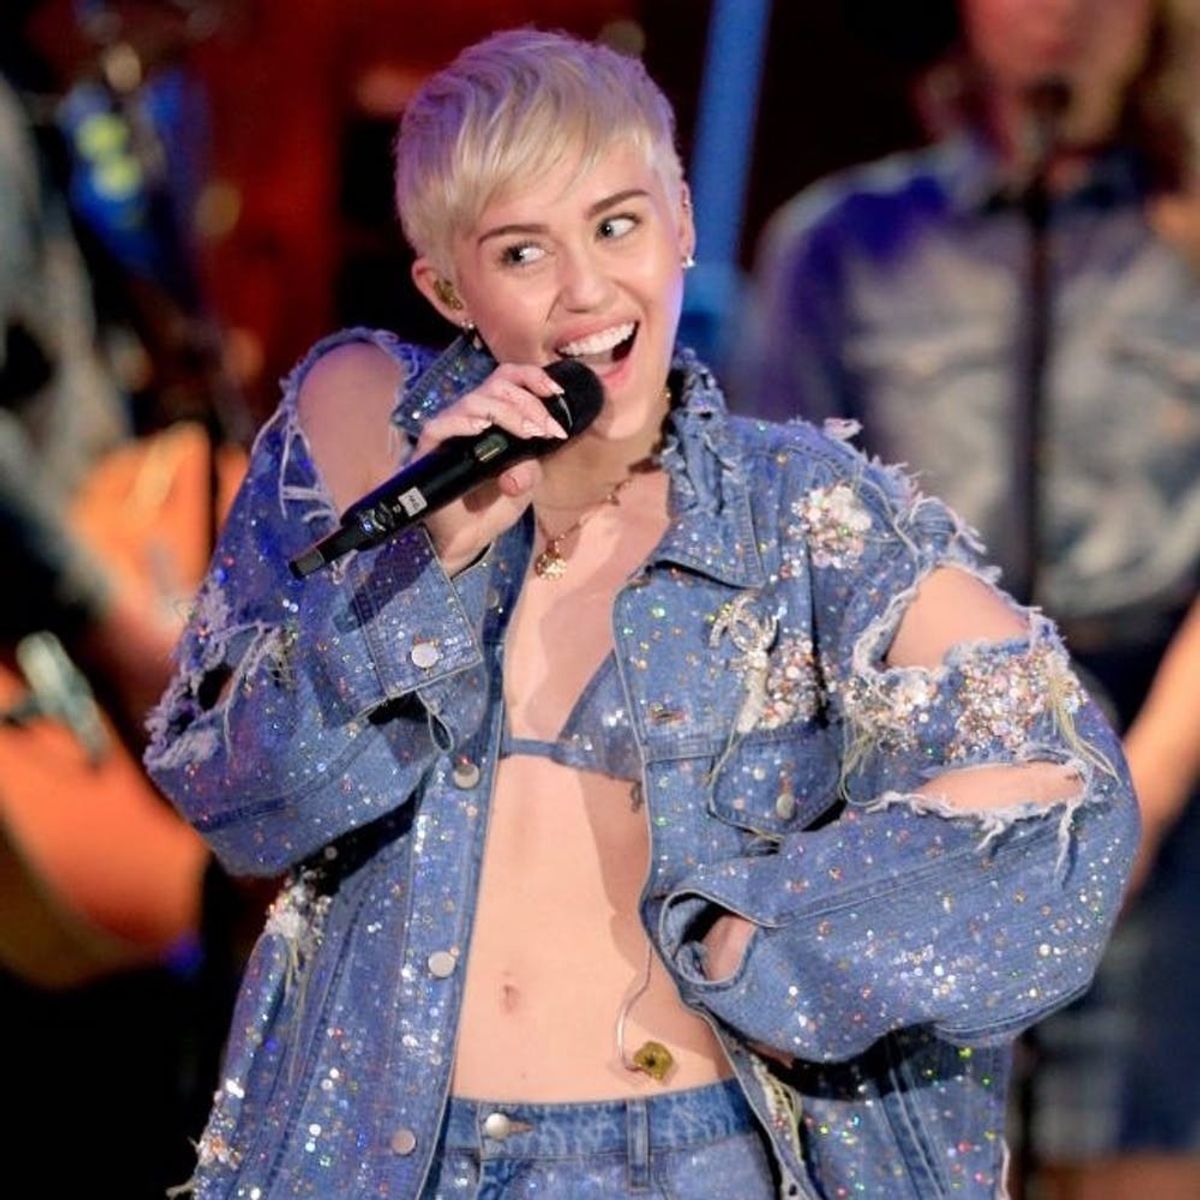 11 Times Miley Cyrus DGAF What You Thought About Her Style